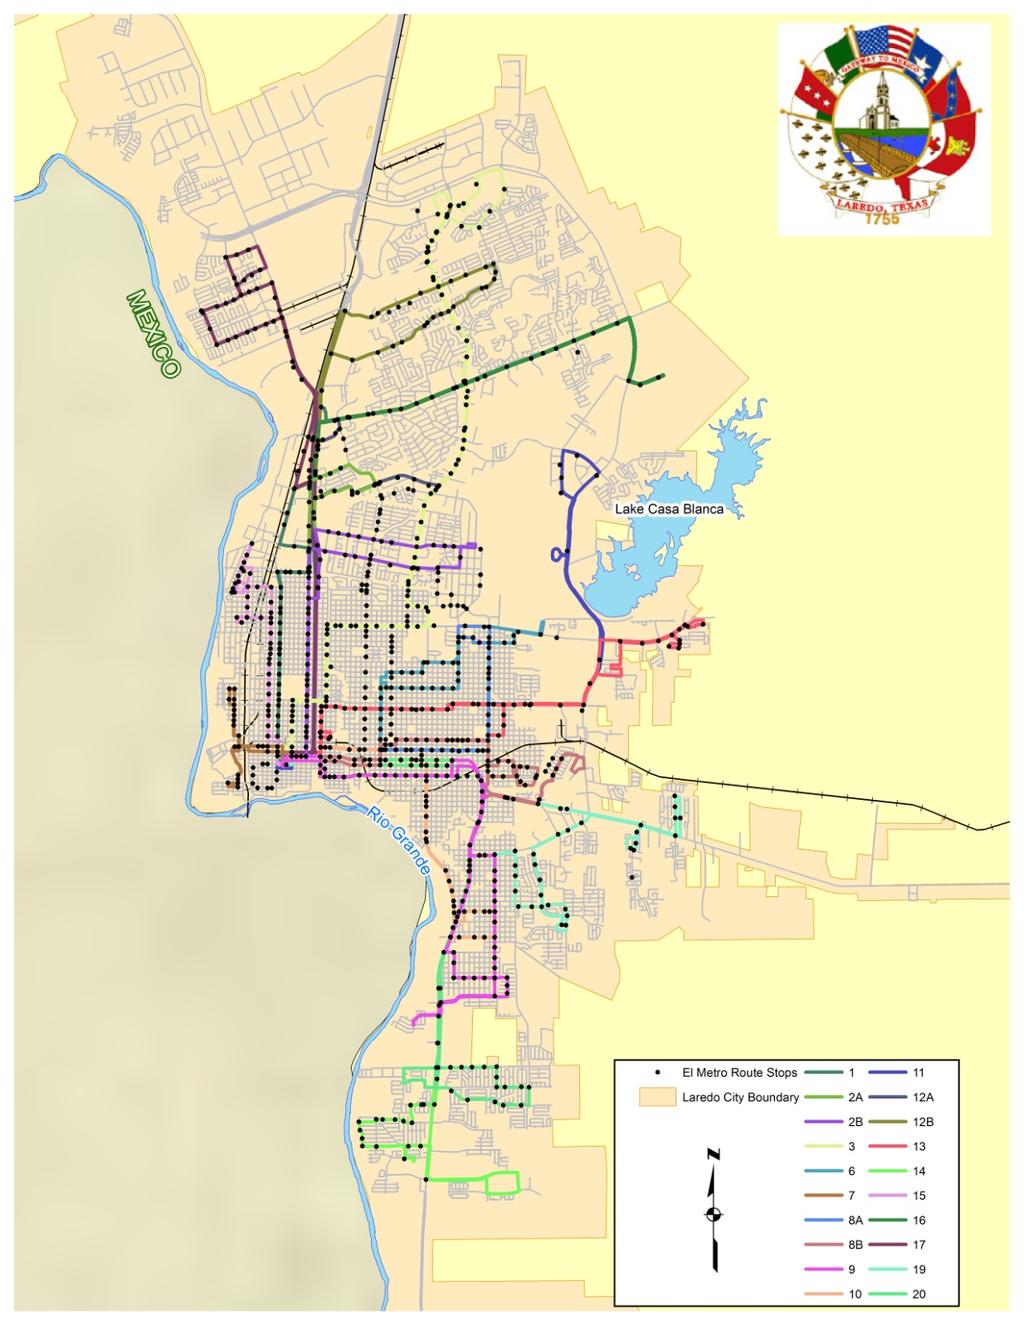 Figure 1: Existing El Metro Bus Routes and Stops (2010)